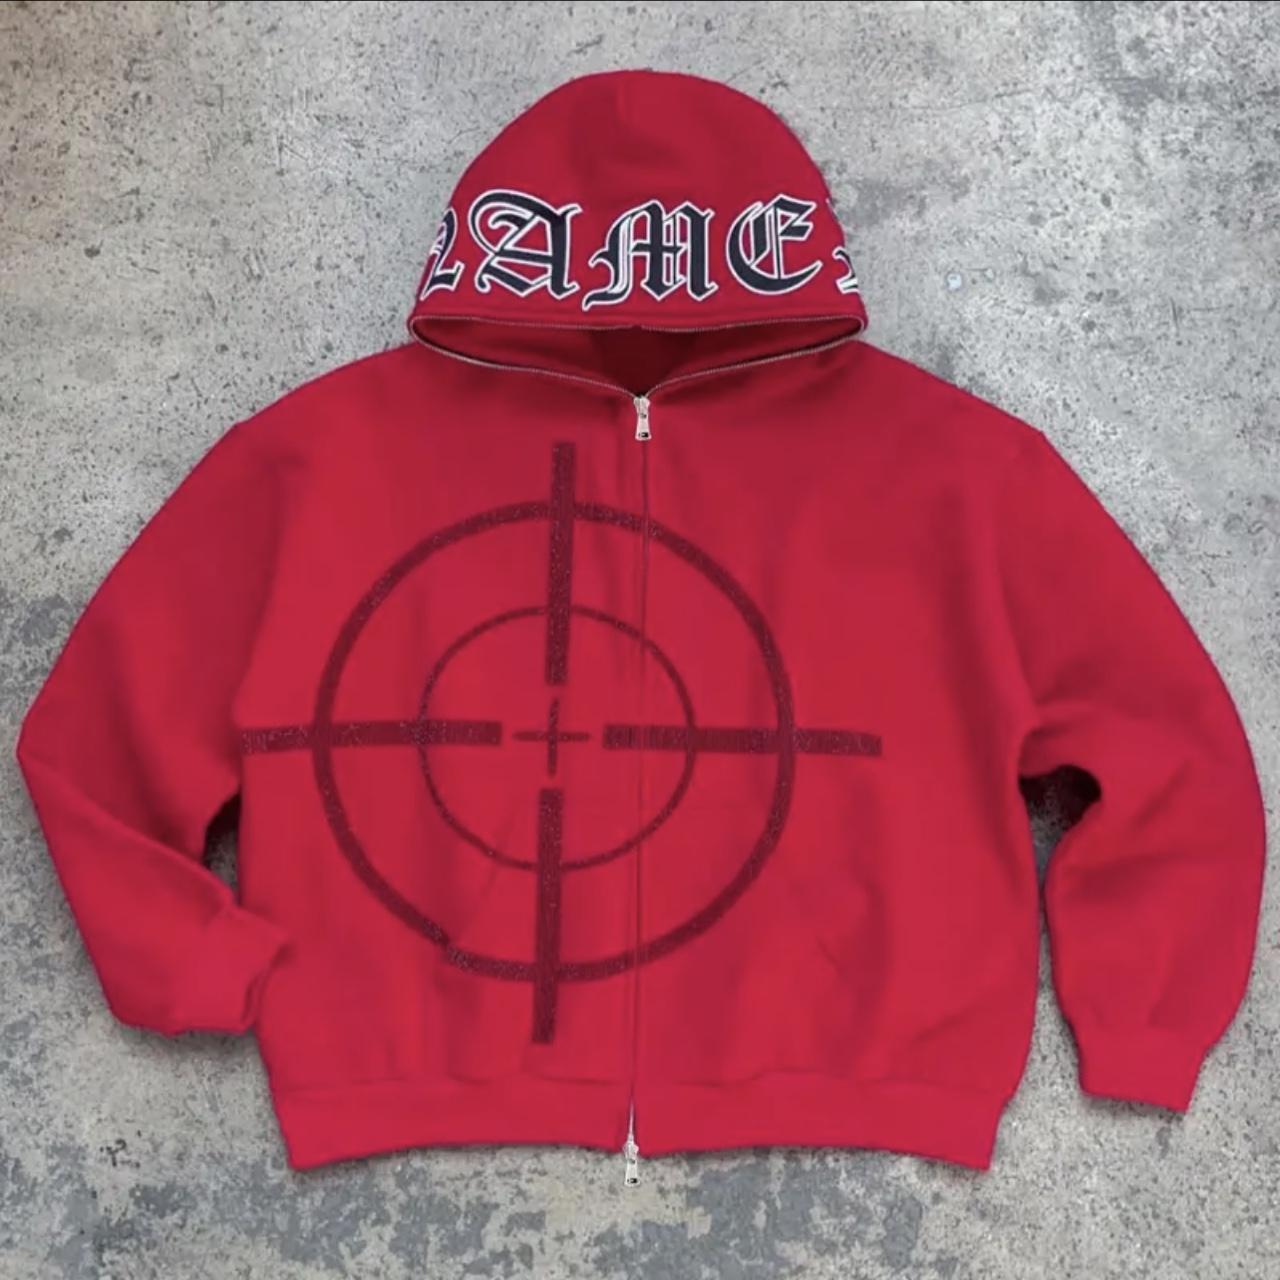 Named Collective Women's Red and White Hoodie | Depop